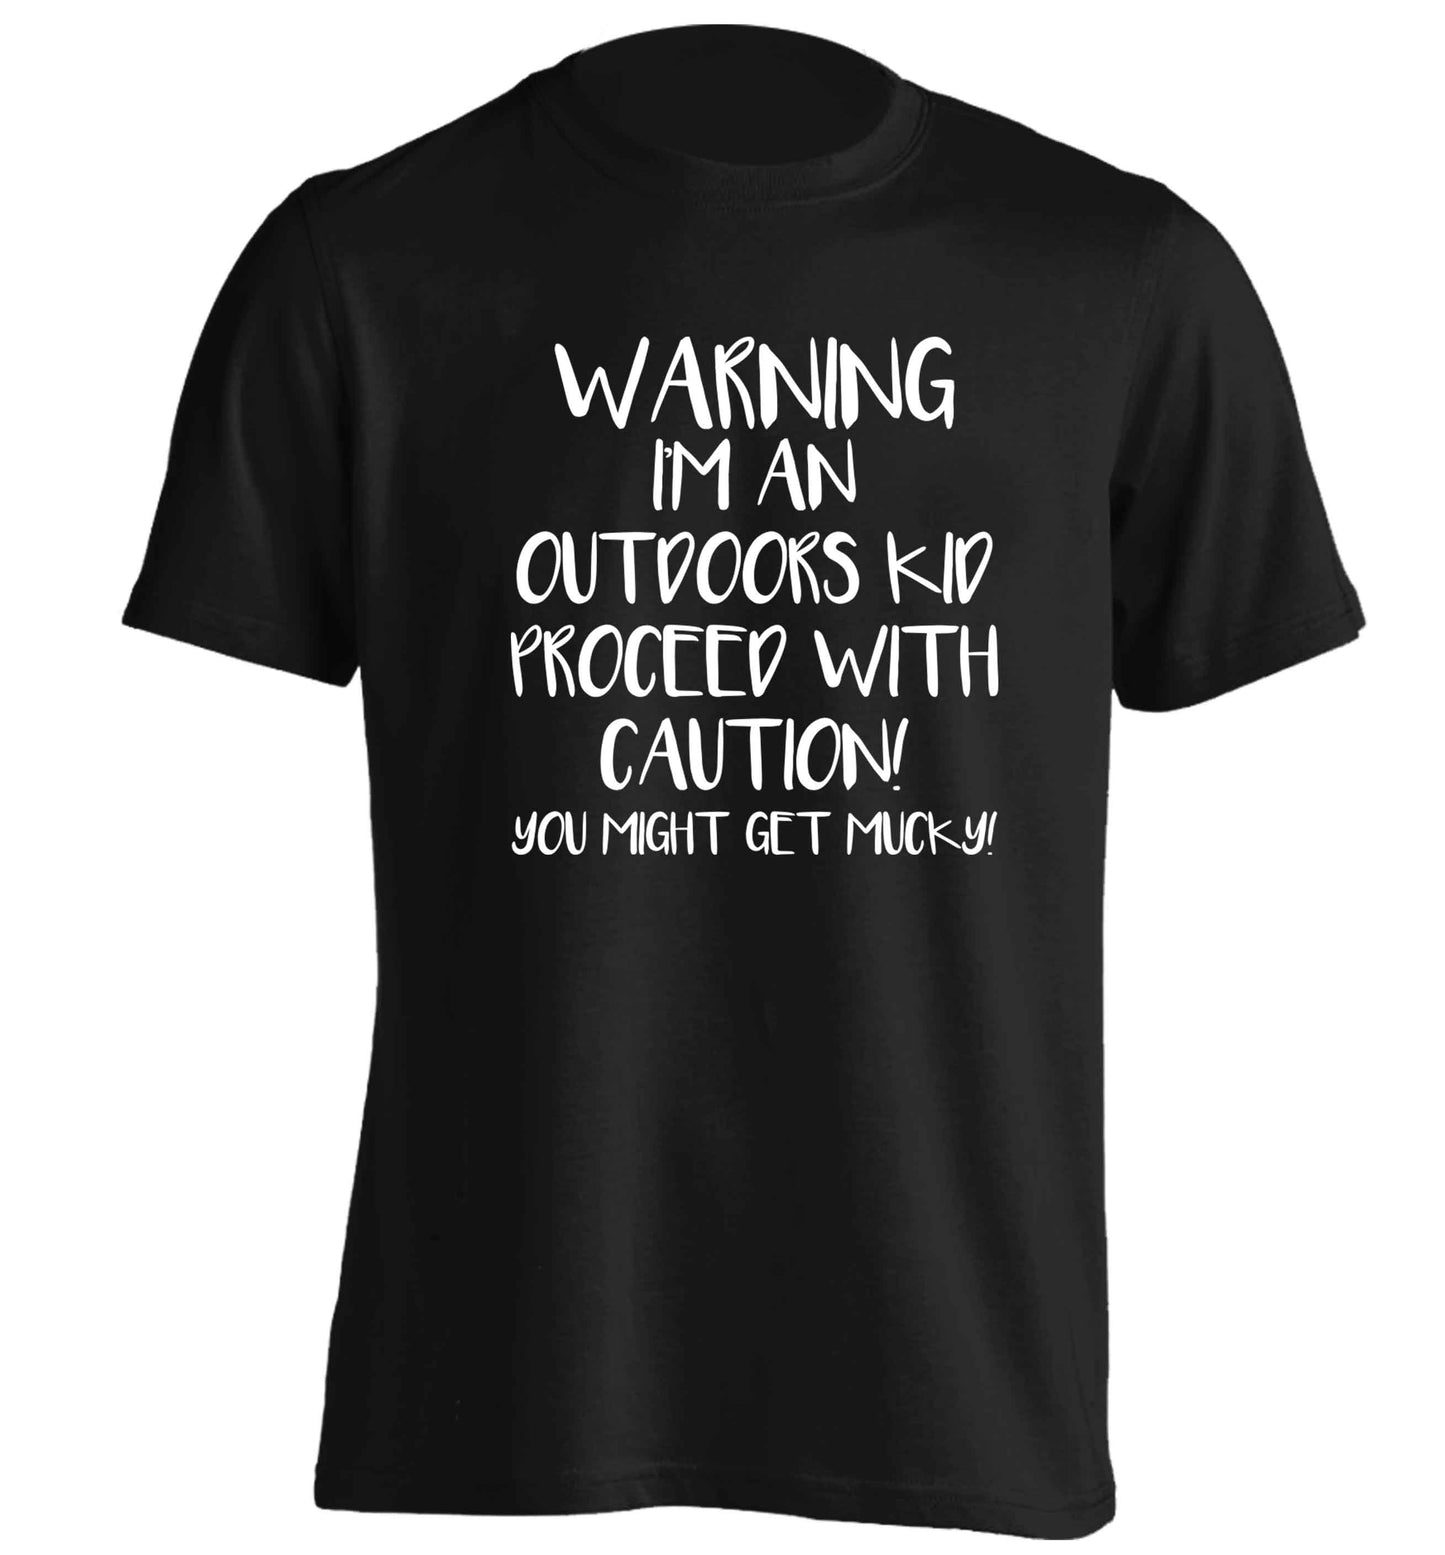 Warning I'm an outdoors kid! Proceed with caution you might get mucky adults unisex black Tshirt 2XL